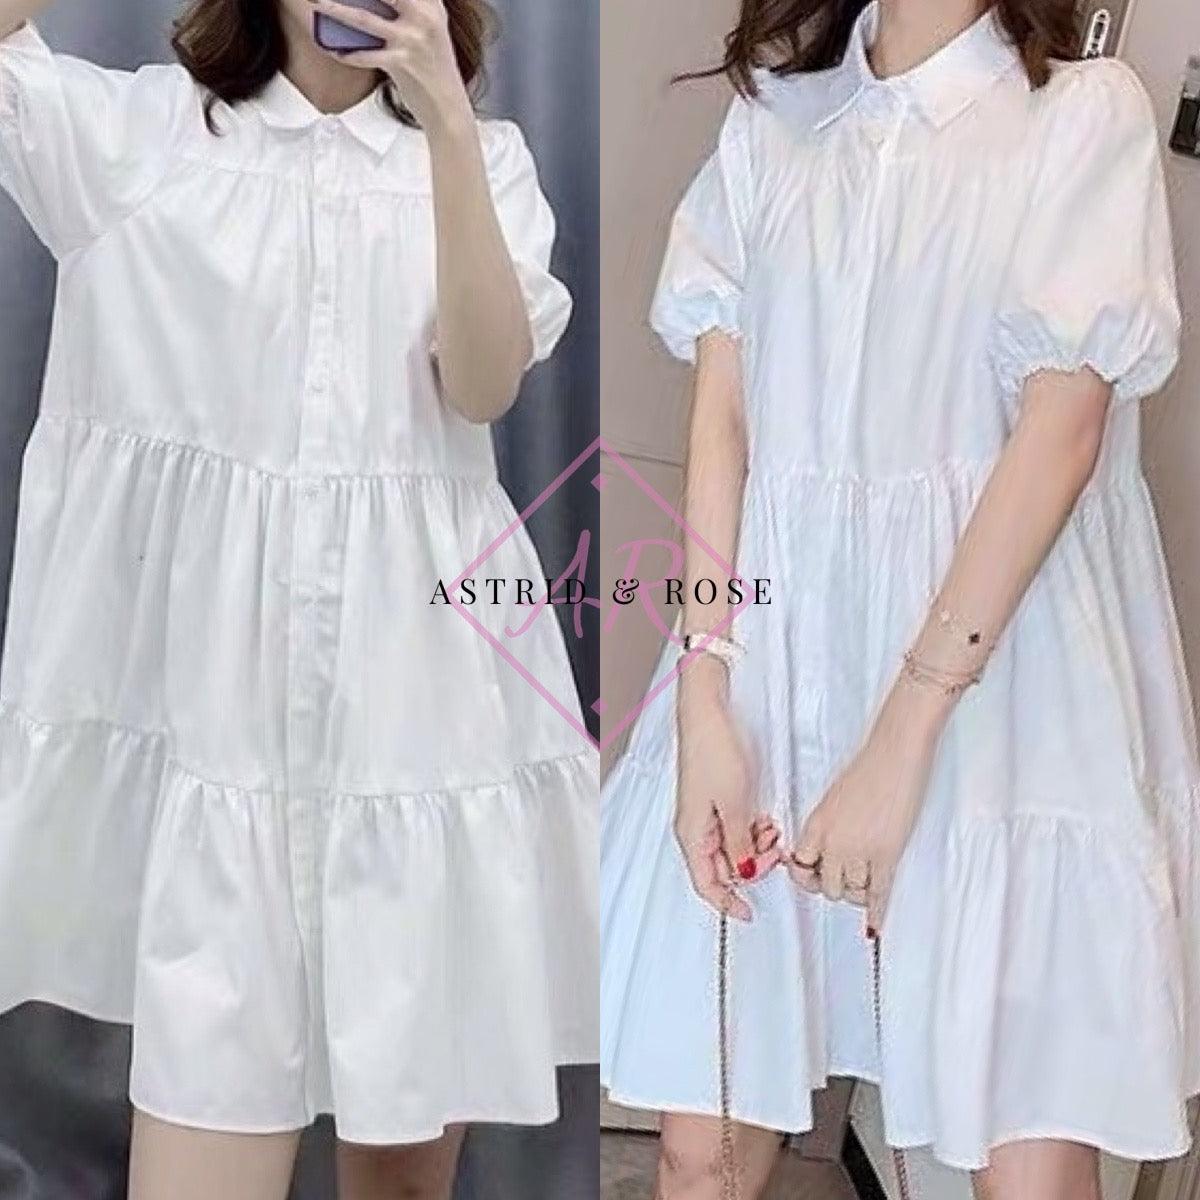 Dress - Taylor in White (PREORDER) - Astrid & Rose